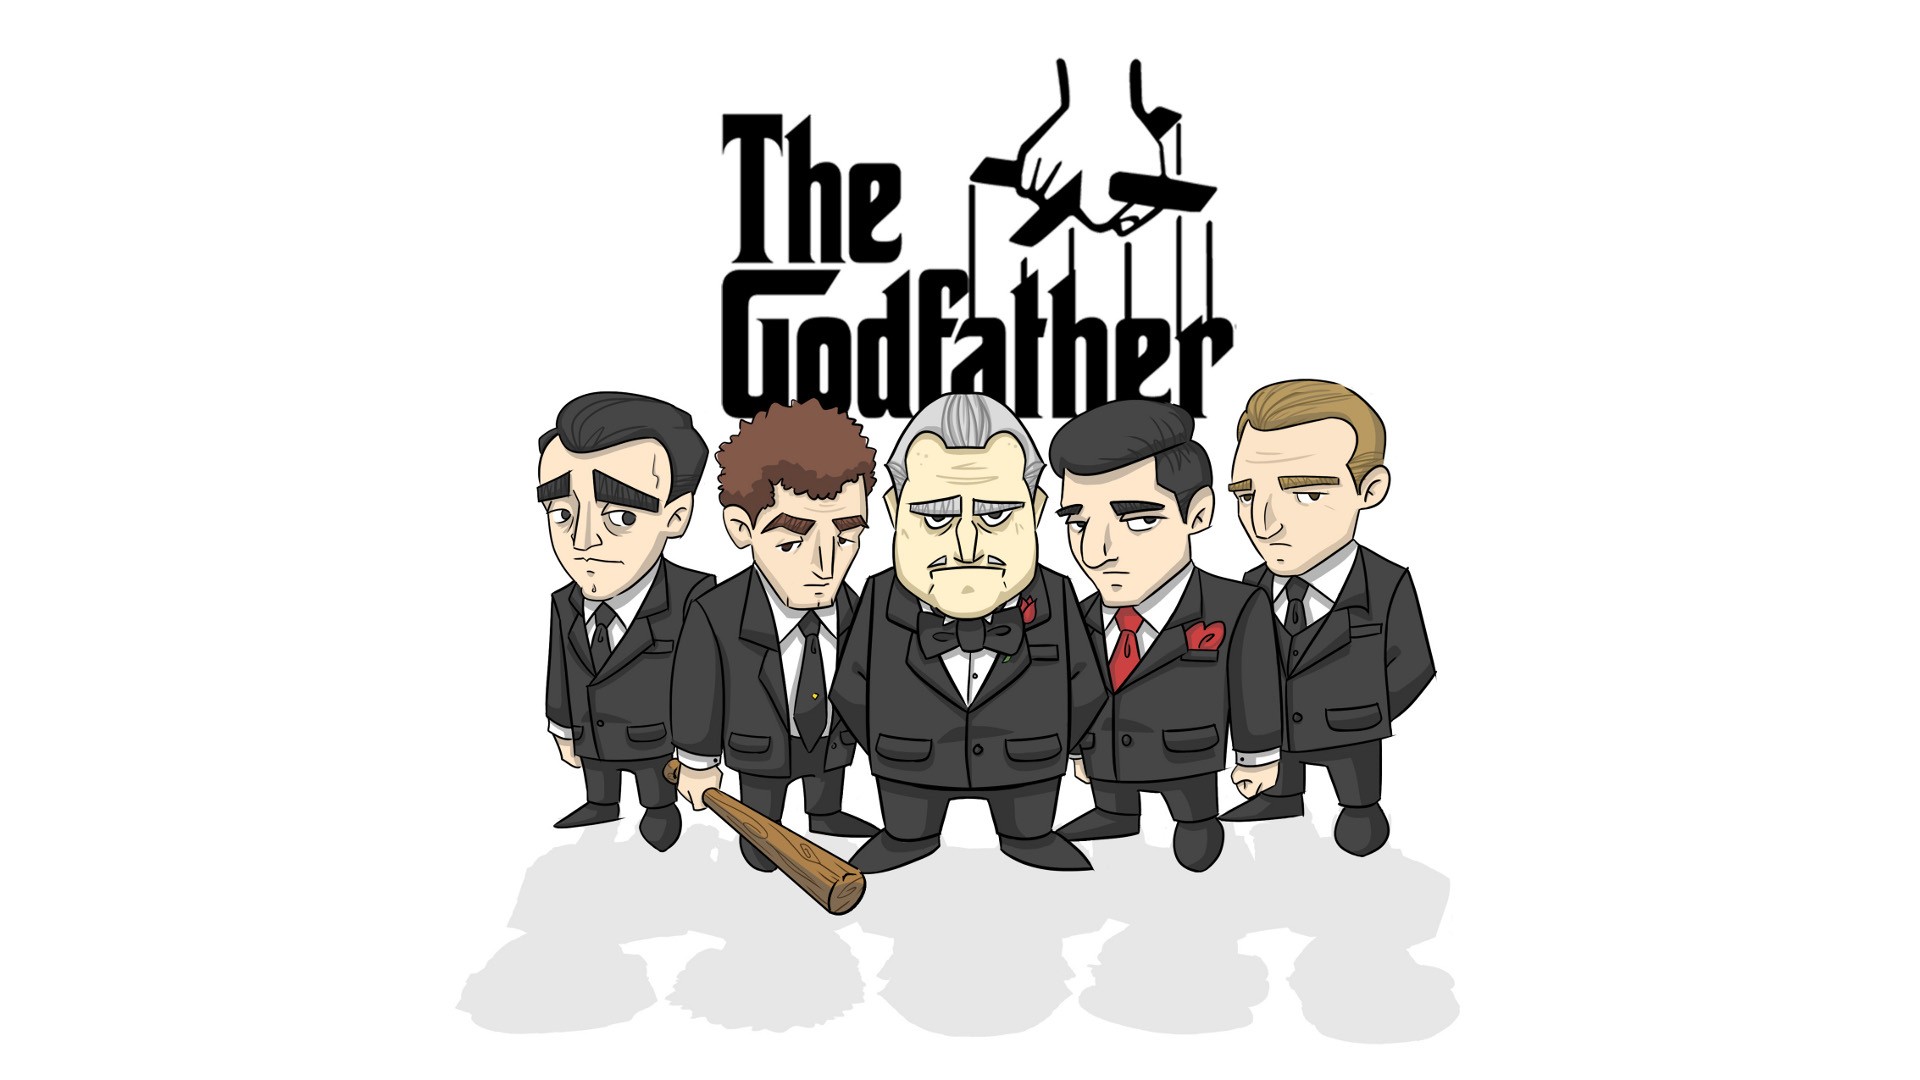 General 1920x1080 The Godfather Vito Corleone cartoon movies artwork humor simple background